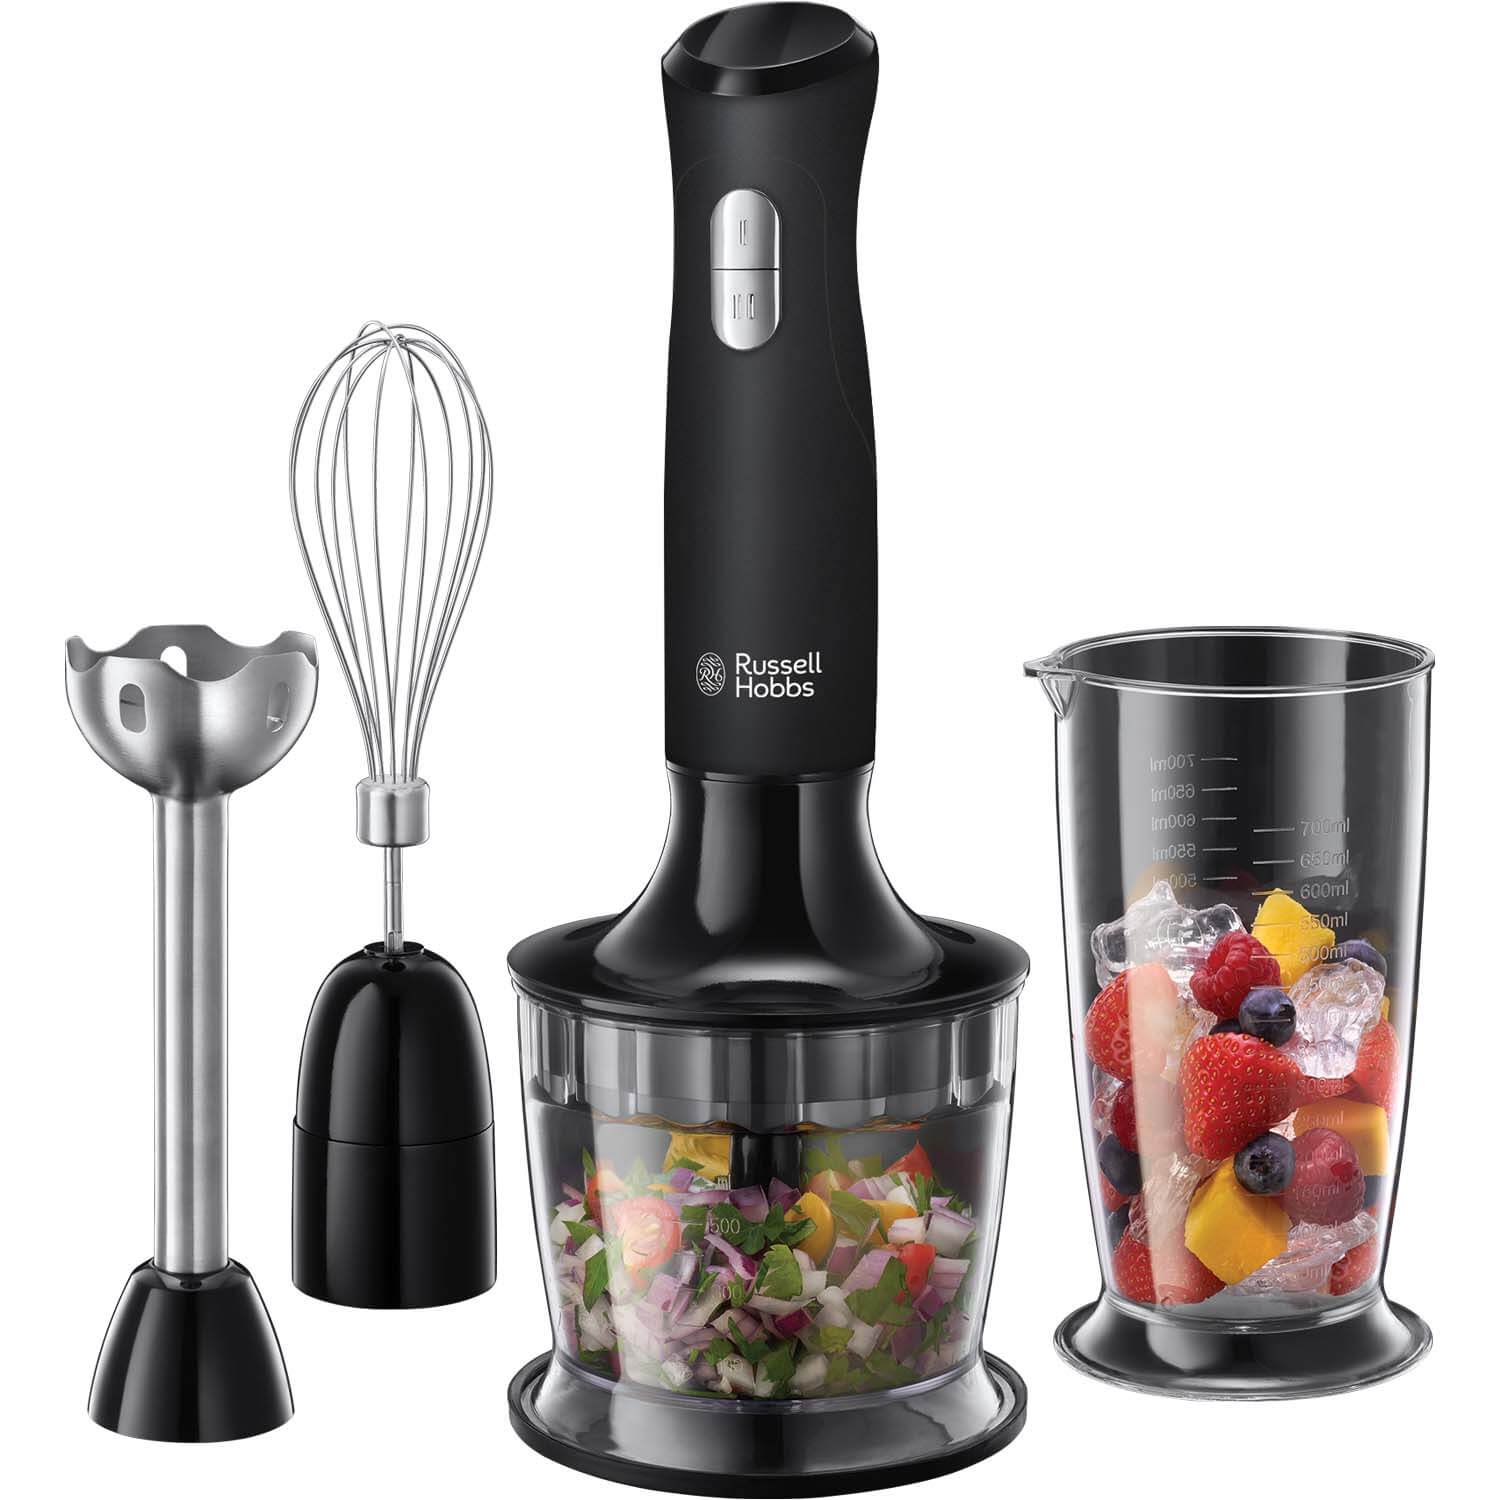 Russell Hobbs 3-in-1 Hand Blender - Black | 24702 1 Shaws Department Stores